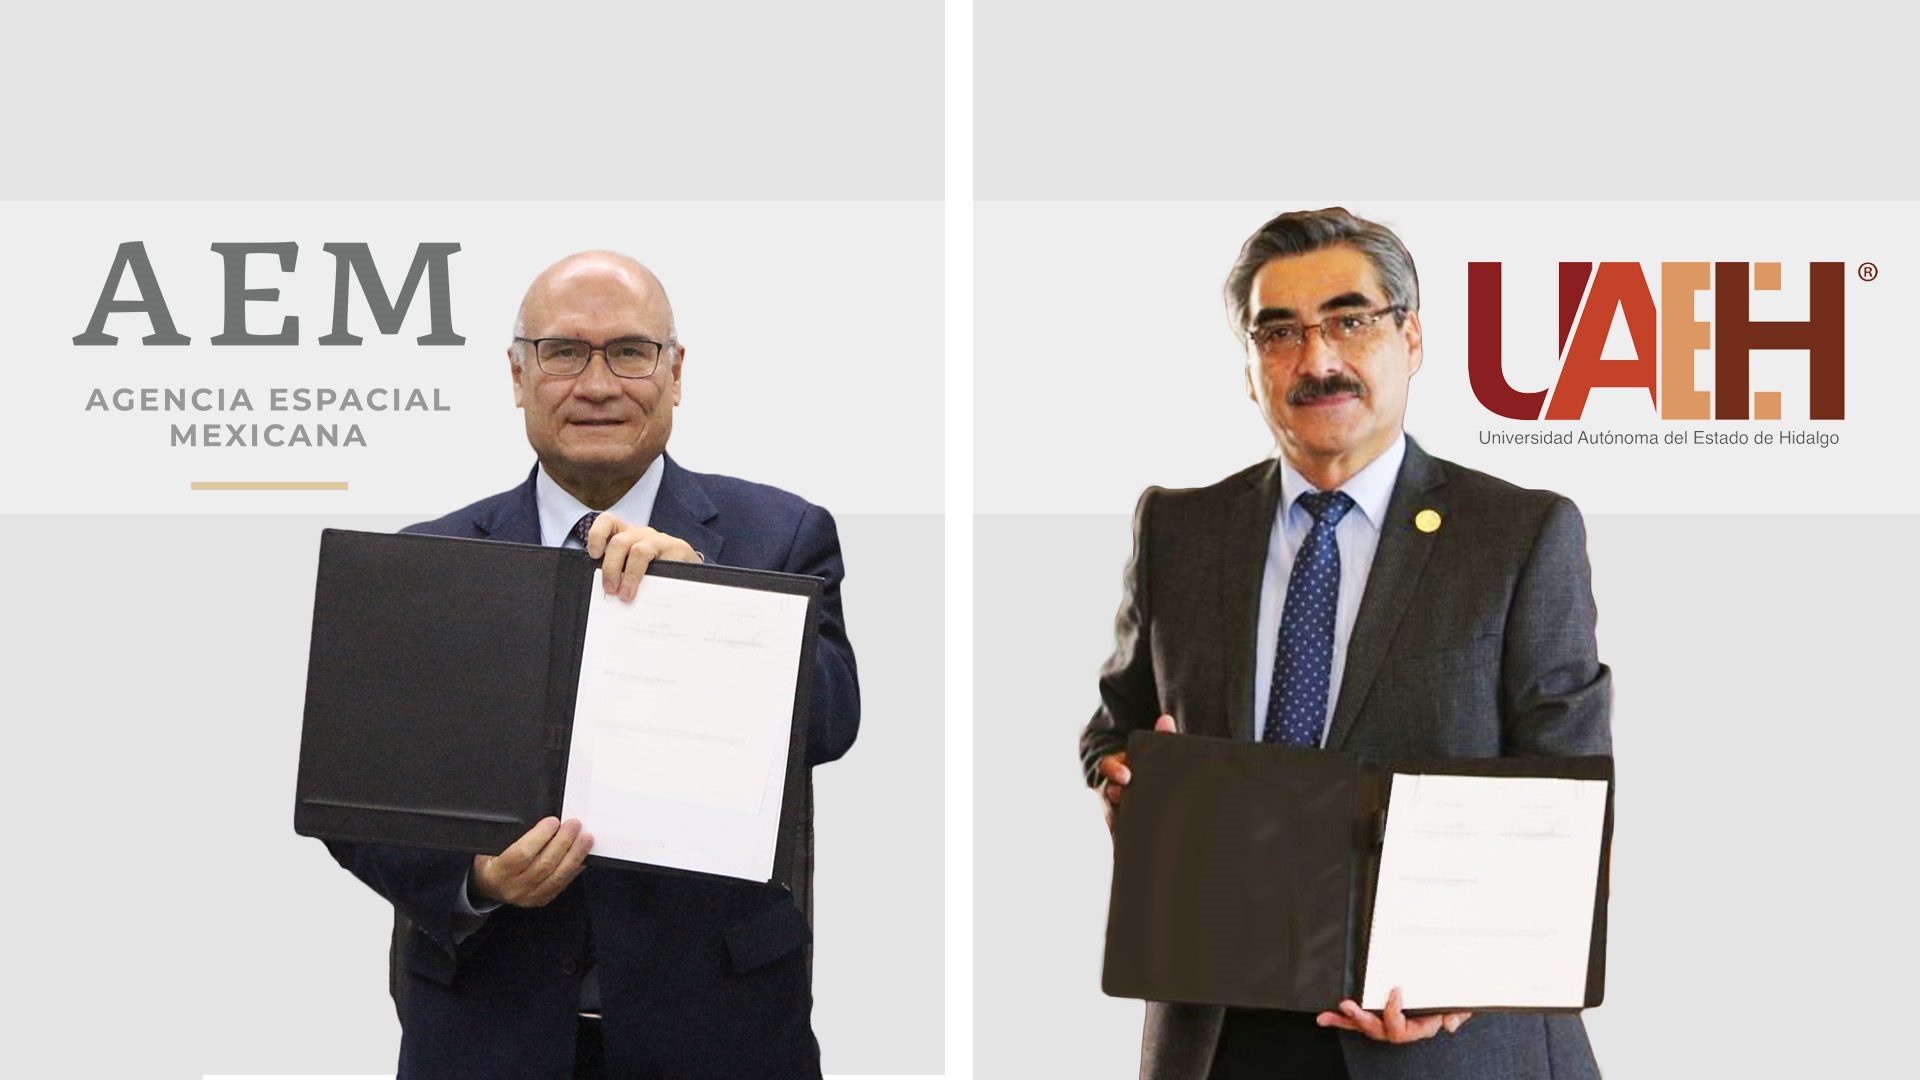 AEM and UAEH join forces to develop space projects